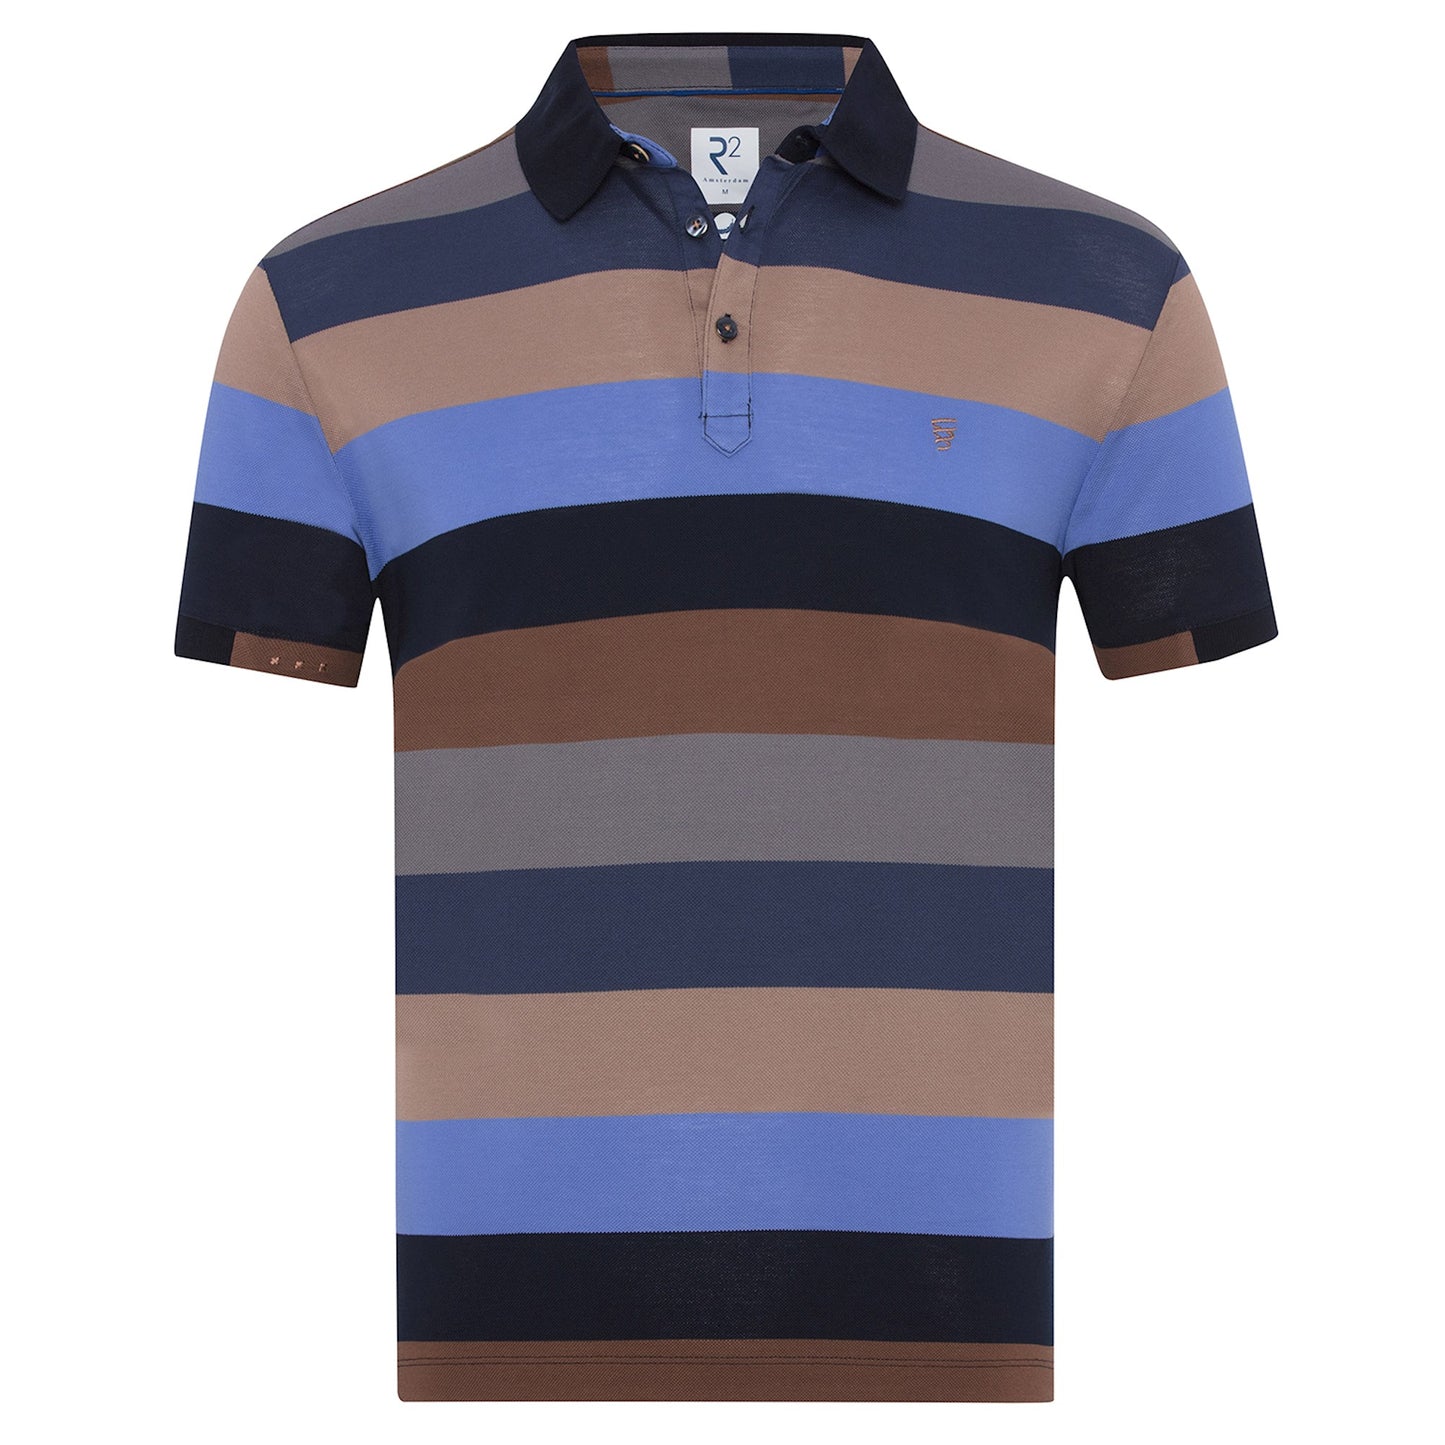 Striped polo by R2